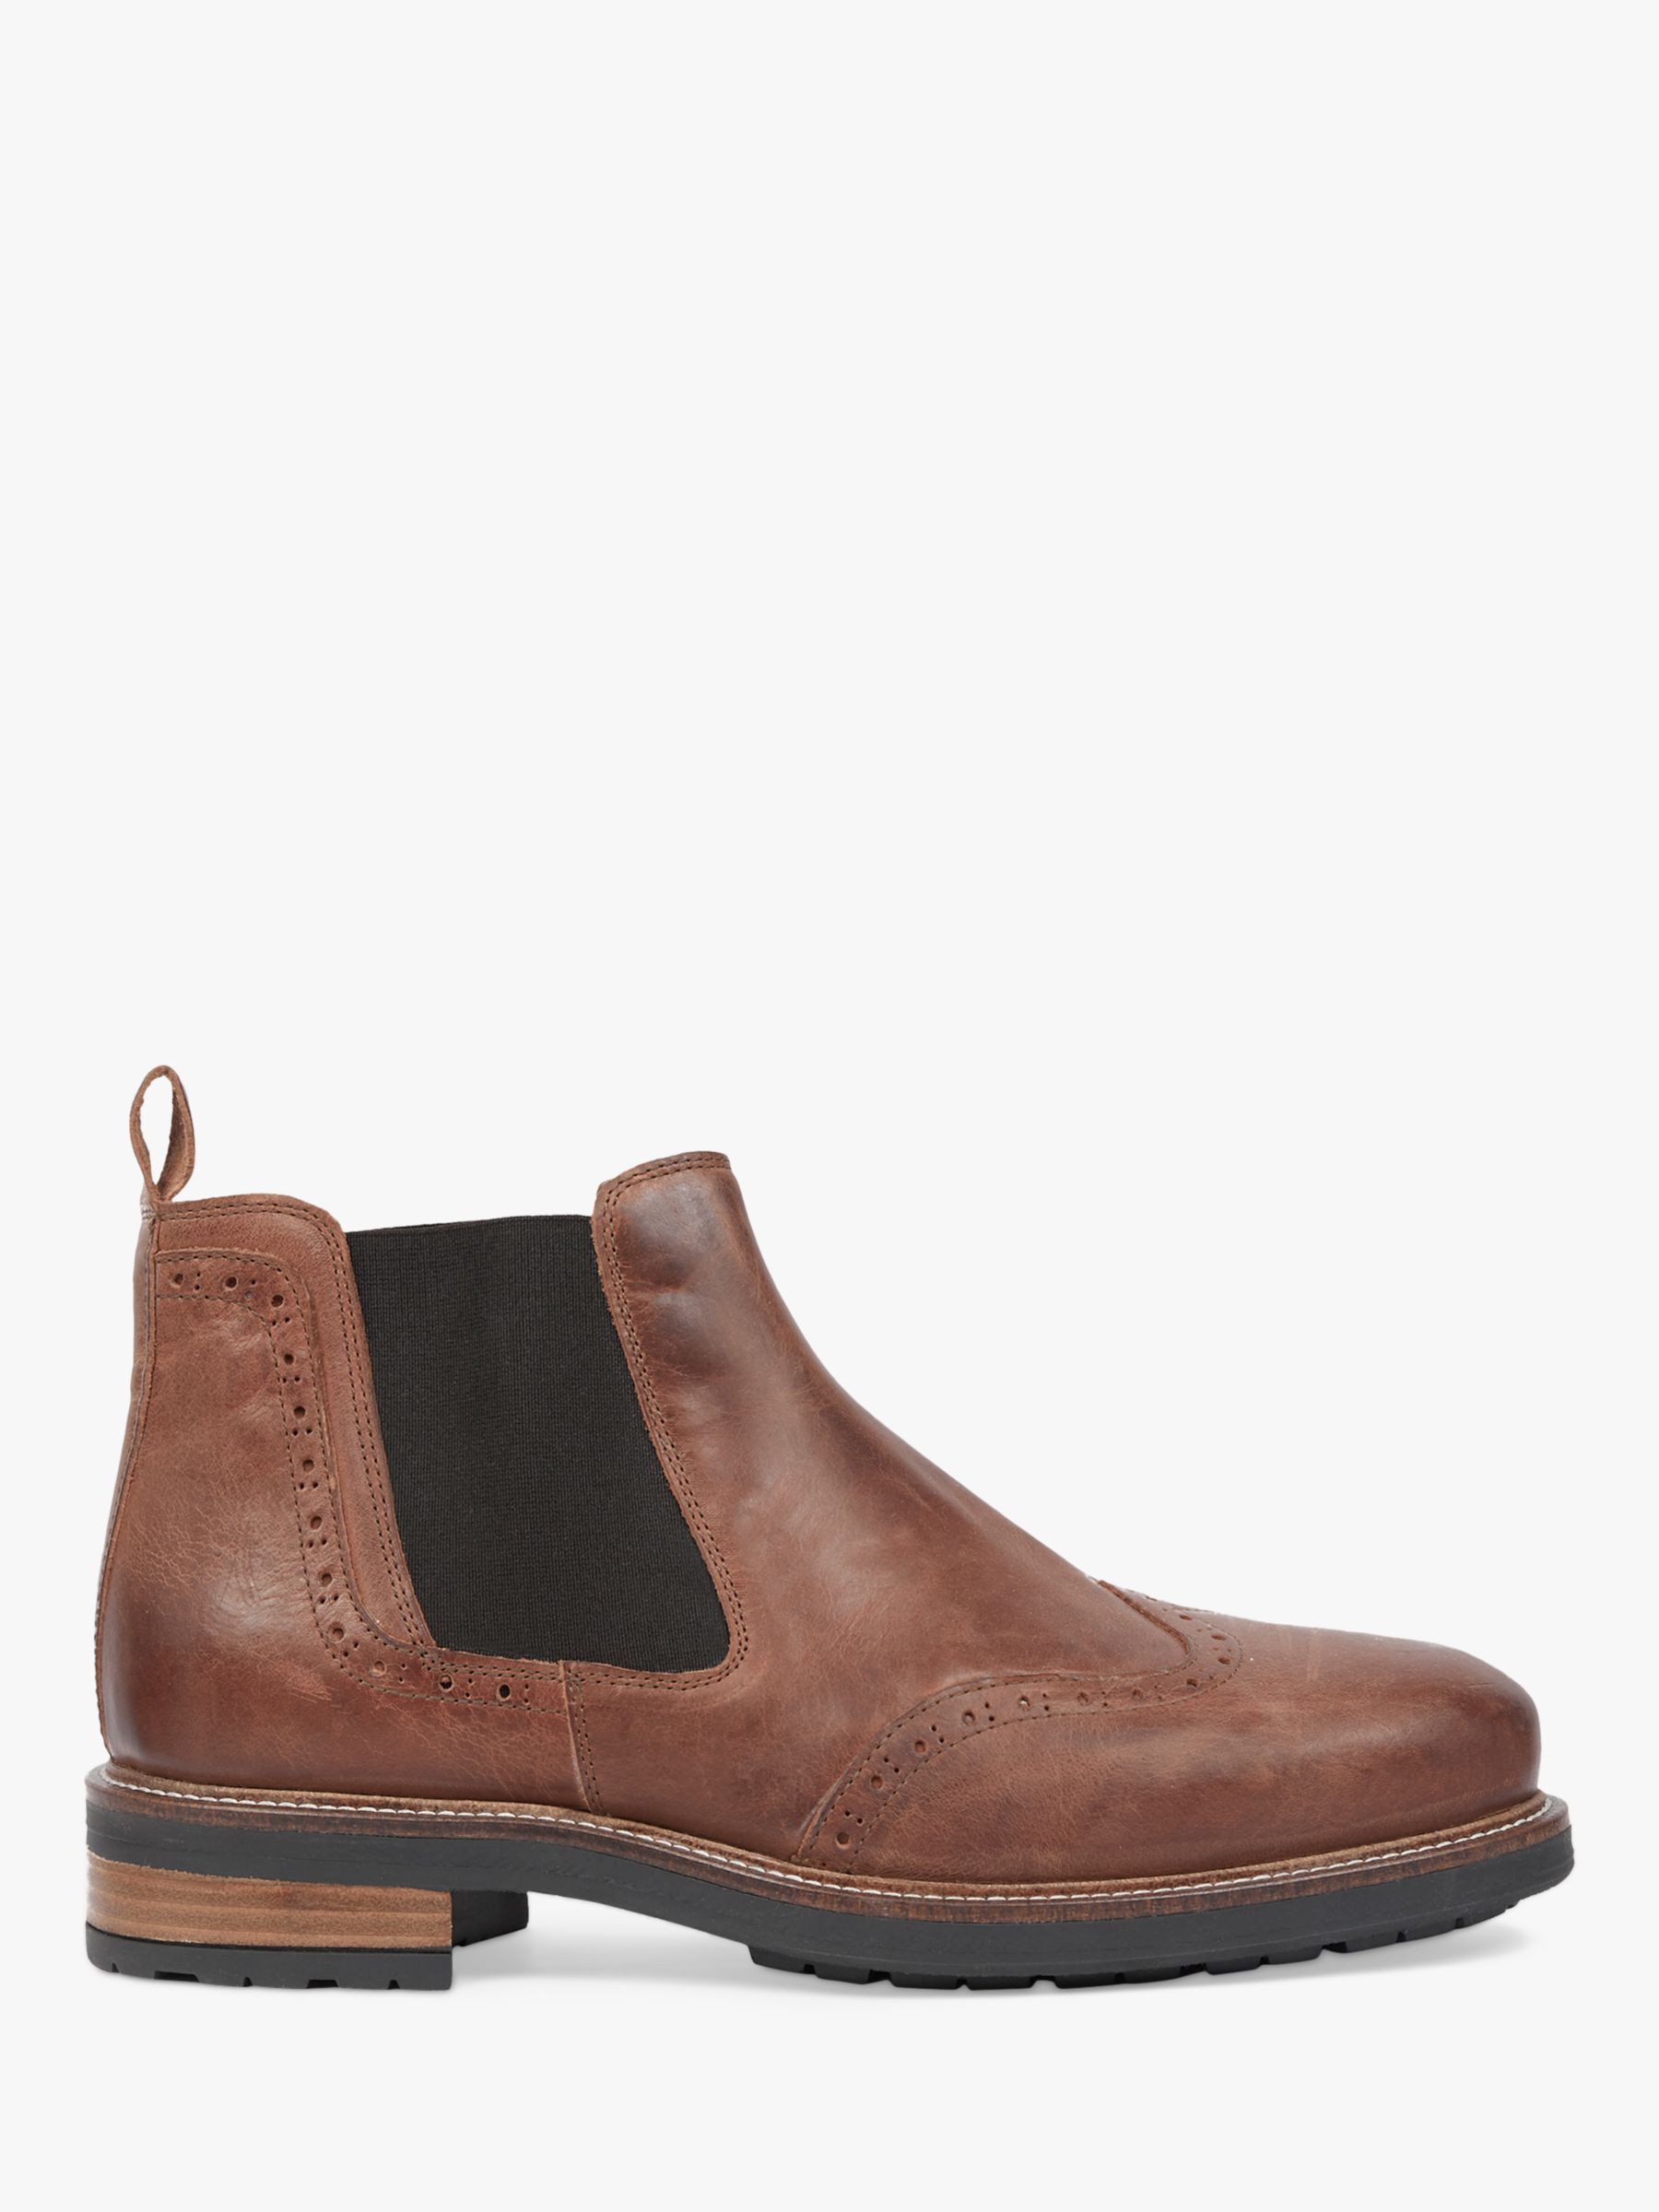 Celtic & Co. Leather Chelsea Brogue Boots, Antique Brown at John Lewis ...